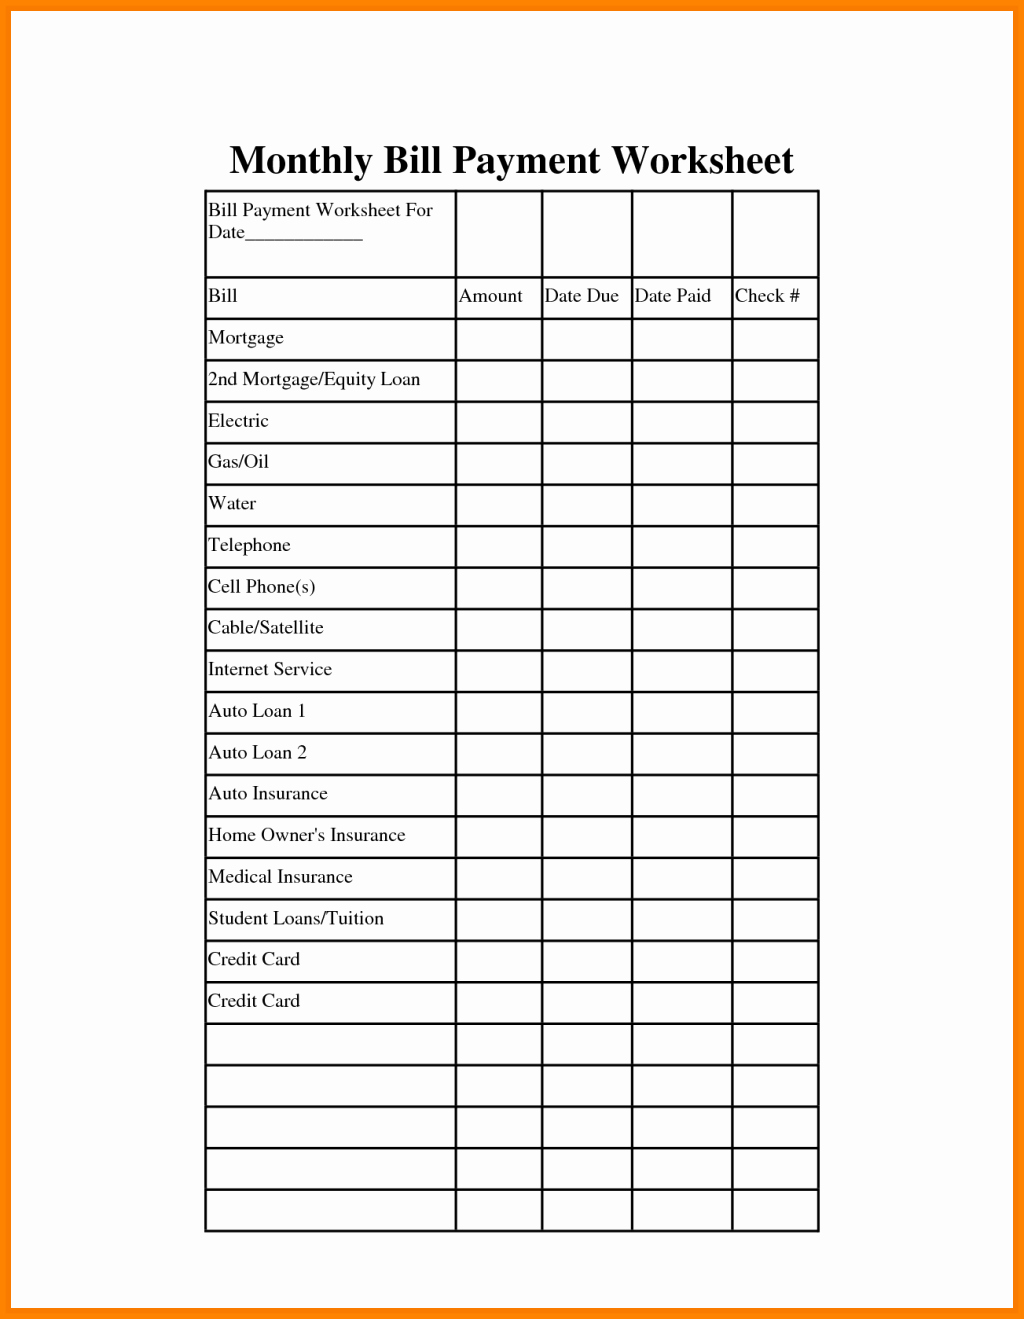 Bill Payment Schedule Template New Remarkable Monthly Bill organizer and Payment Schedule